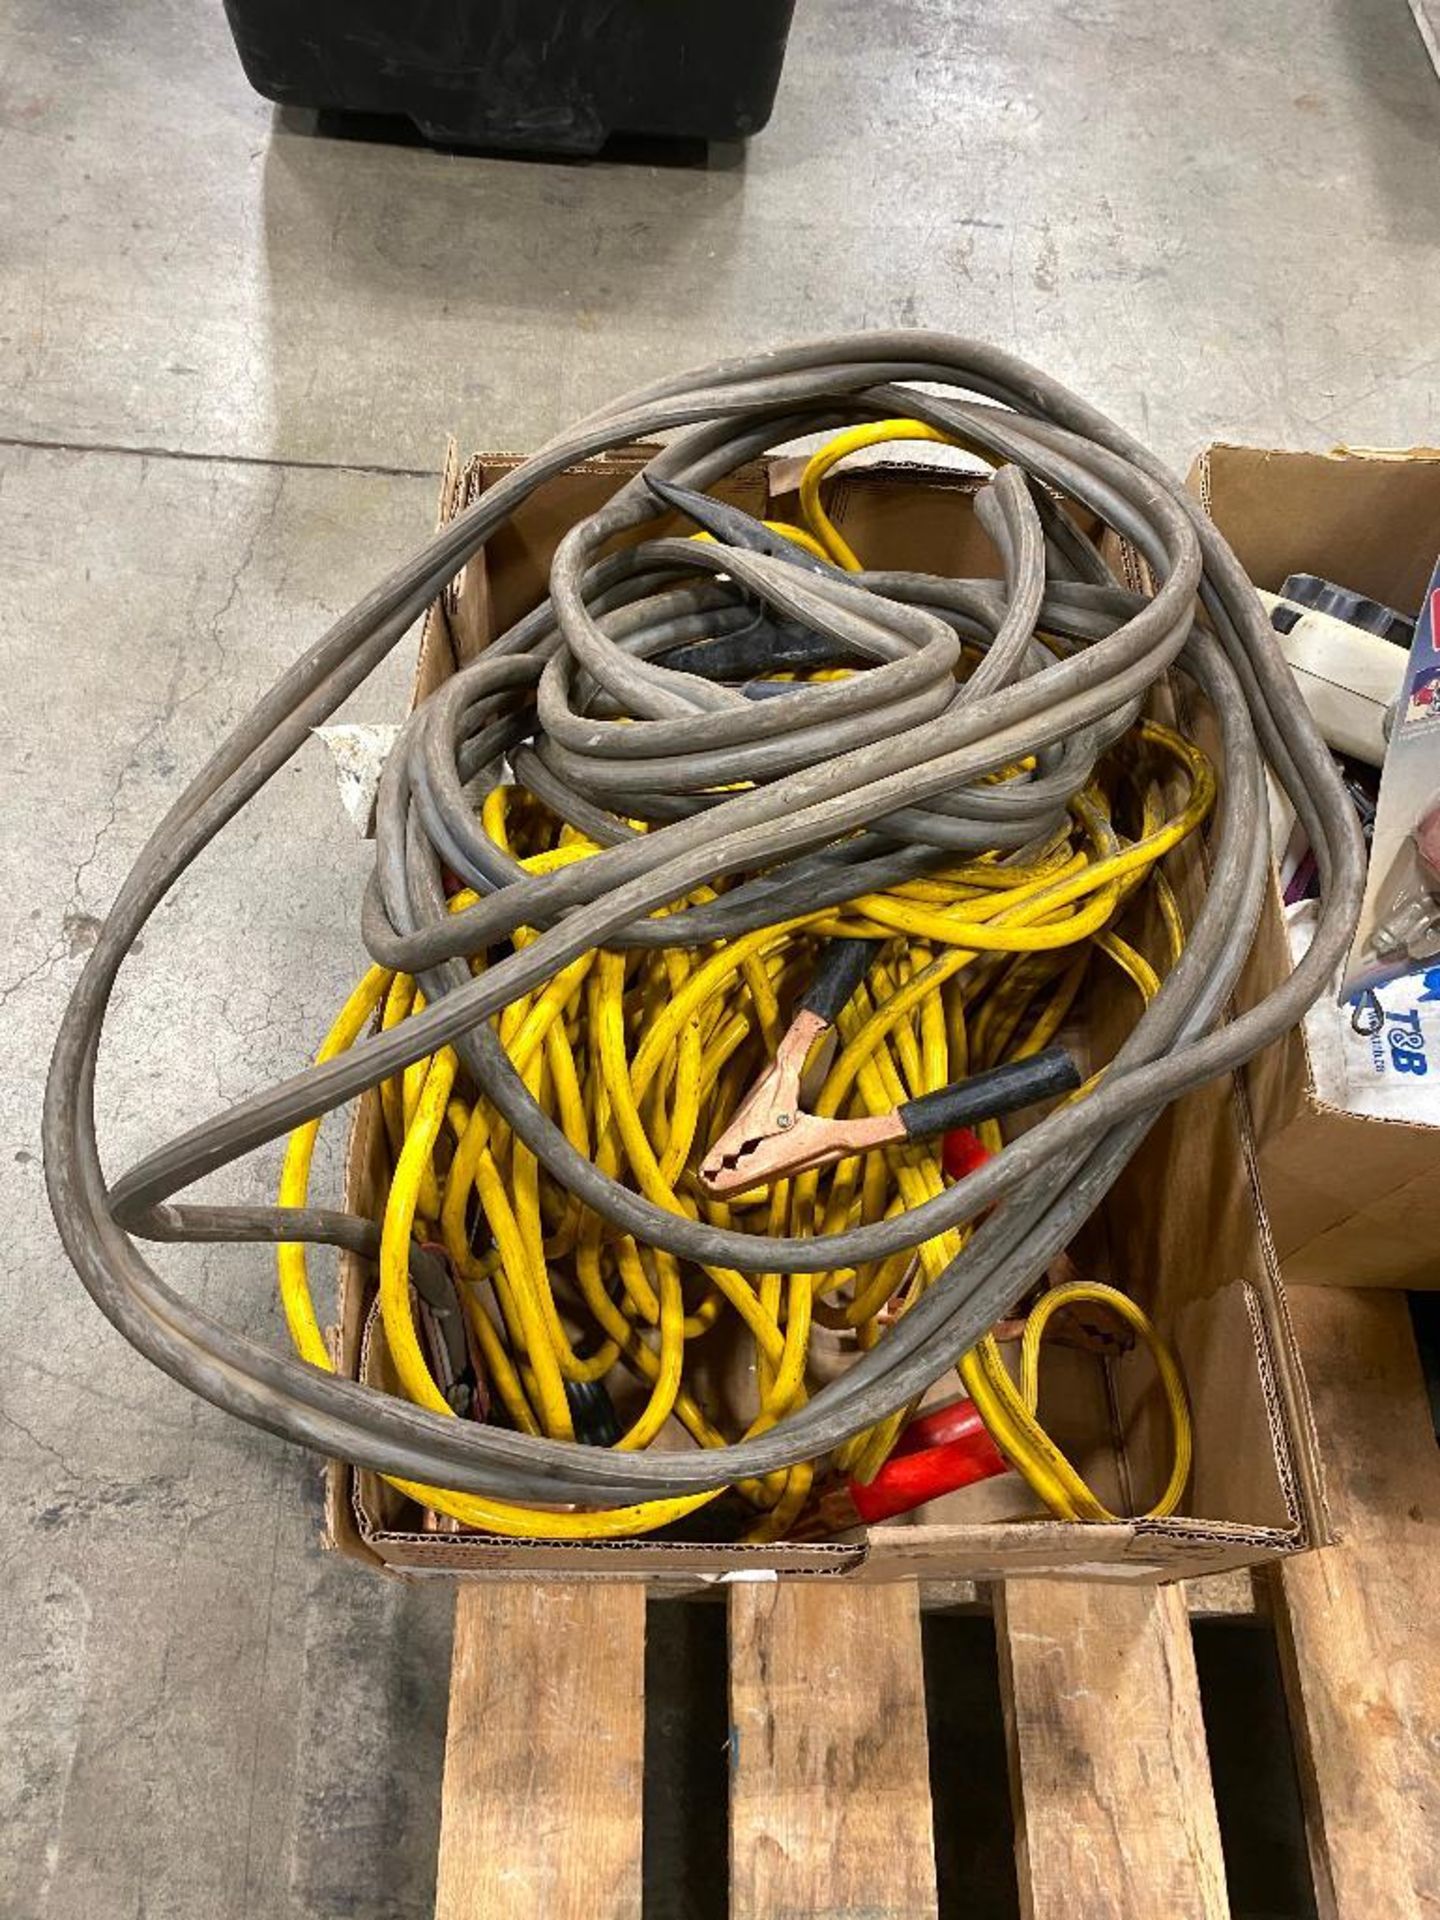 Lot of (2) Sets of Booster Cables, Extension Cord, etc. - Image 3 of 3